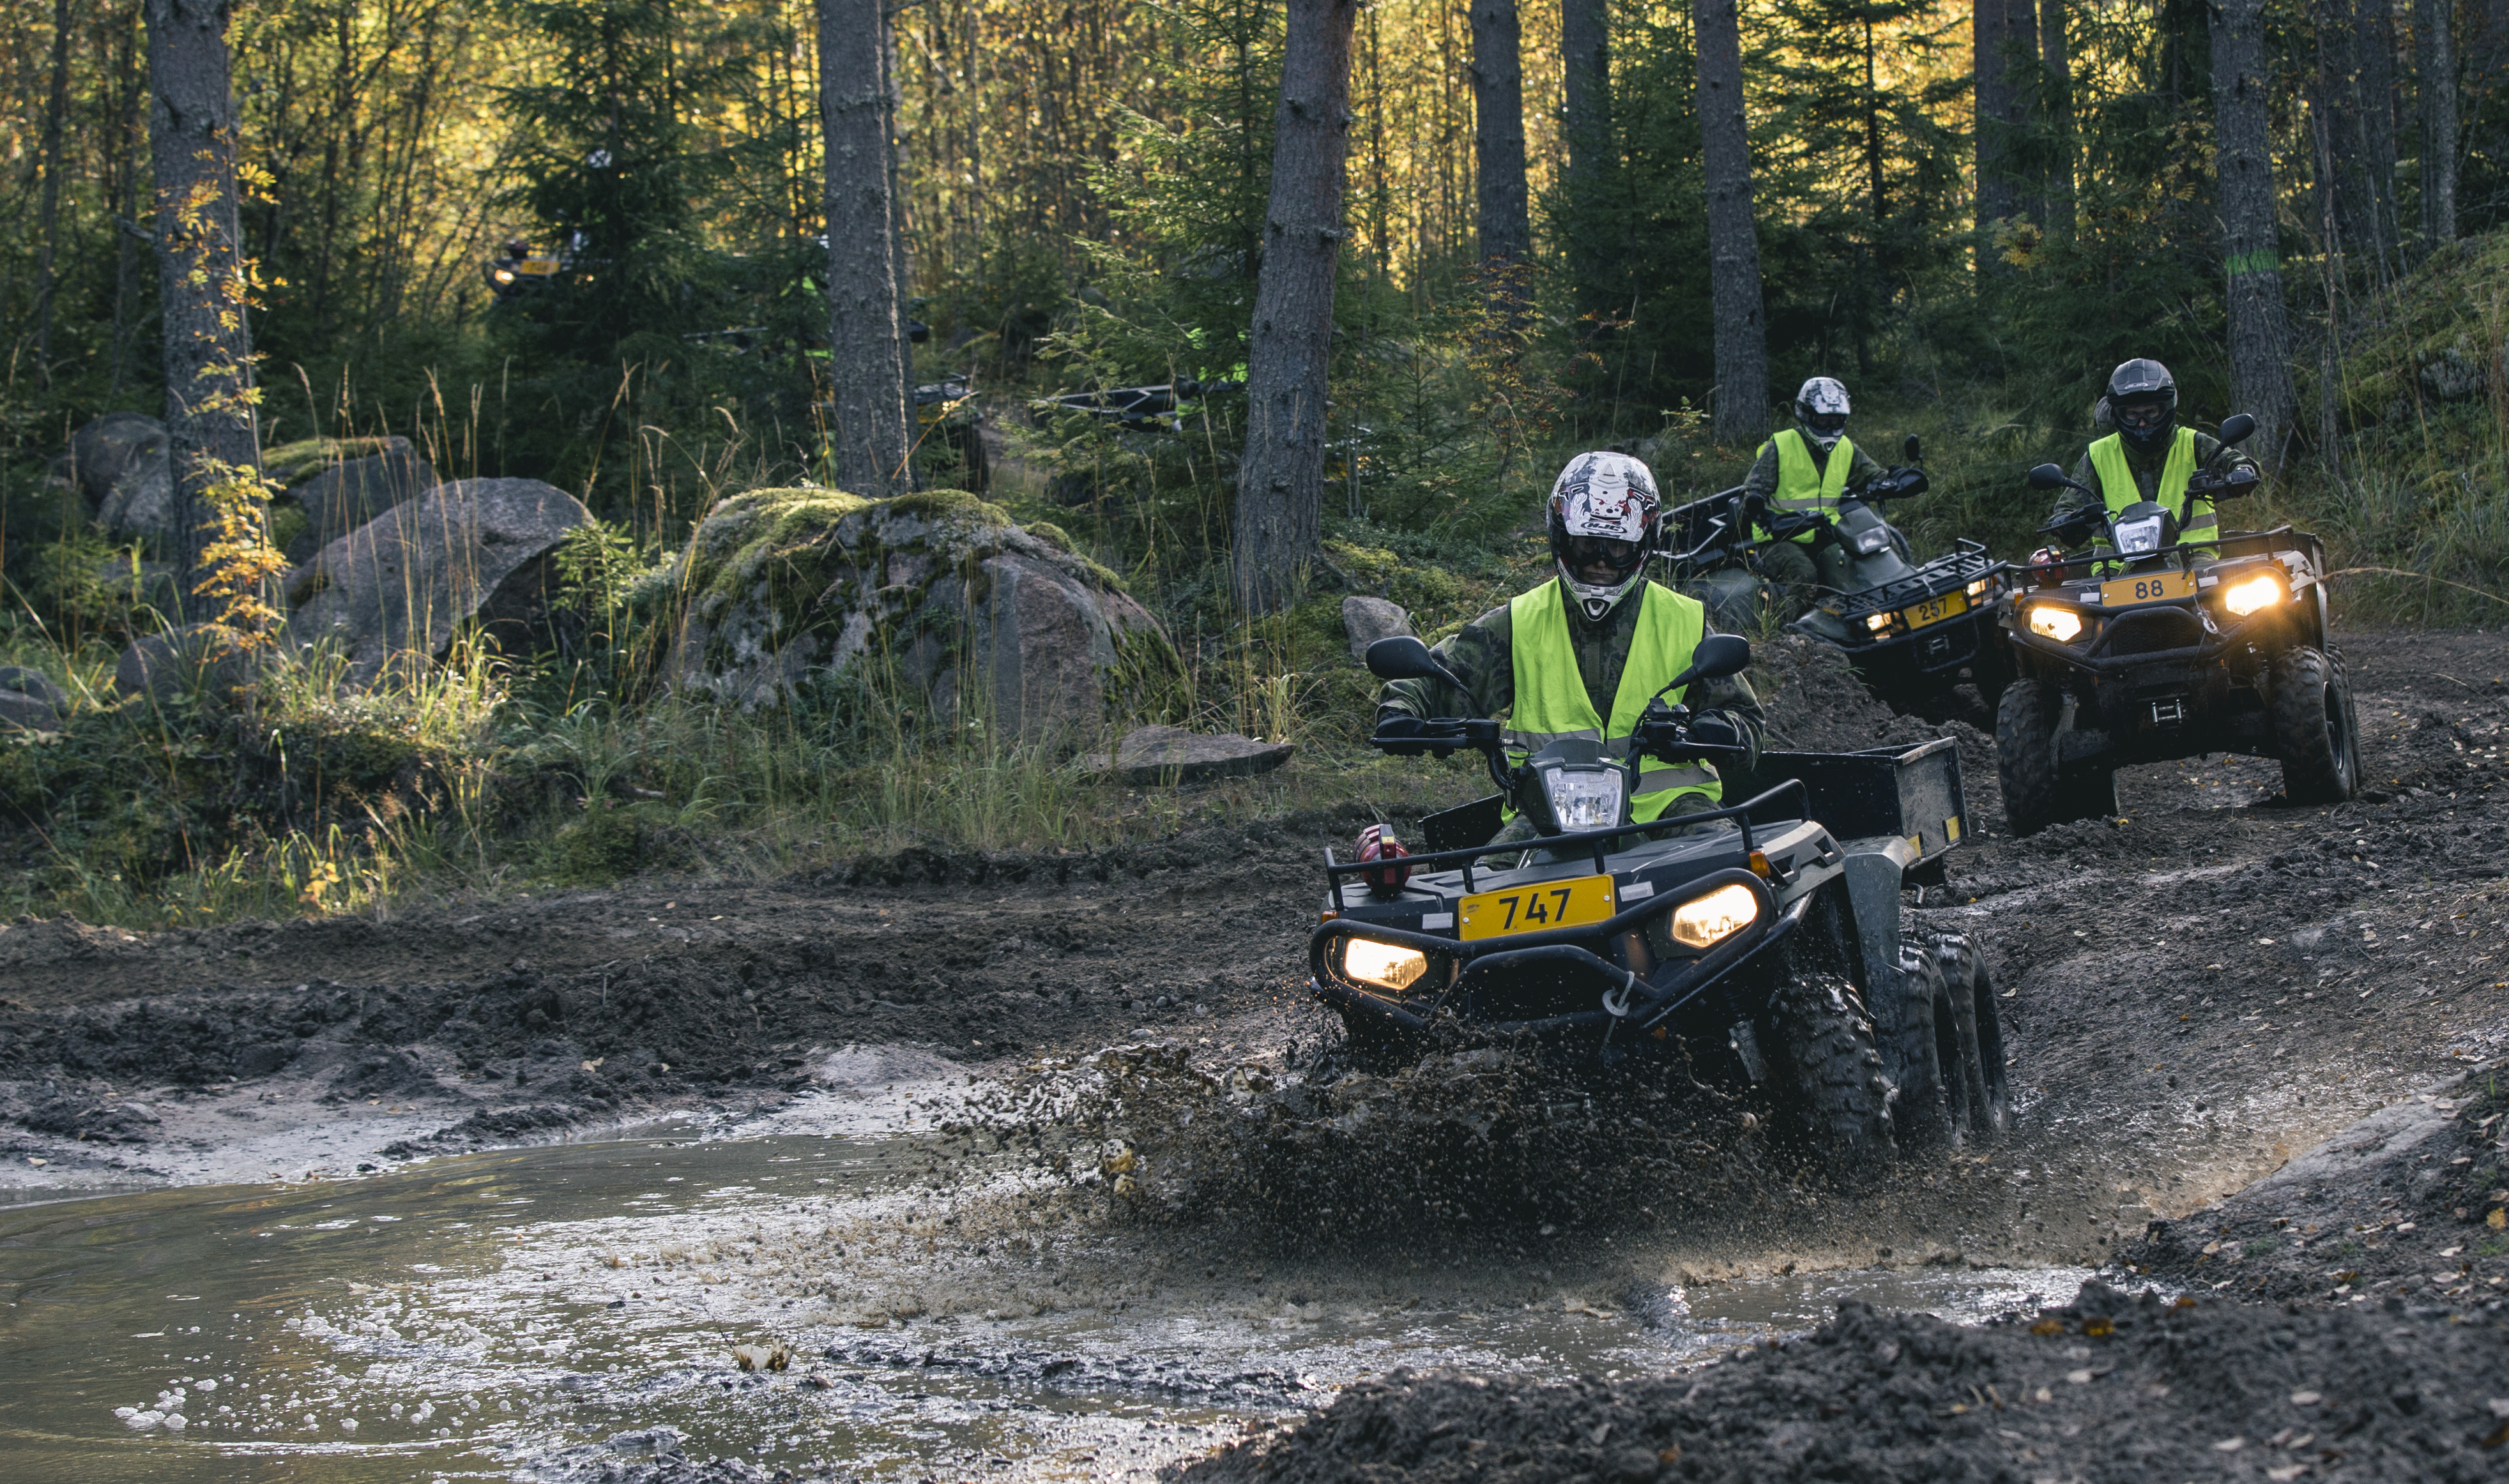 Soldiers ride over a puddle of water on quad bikes